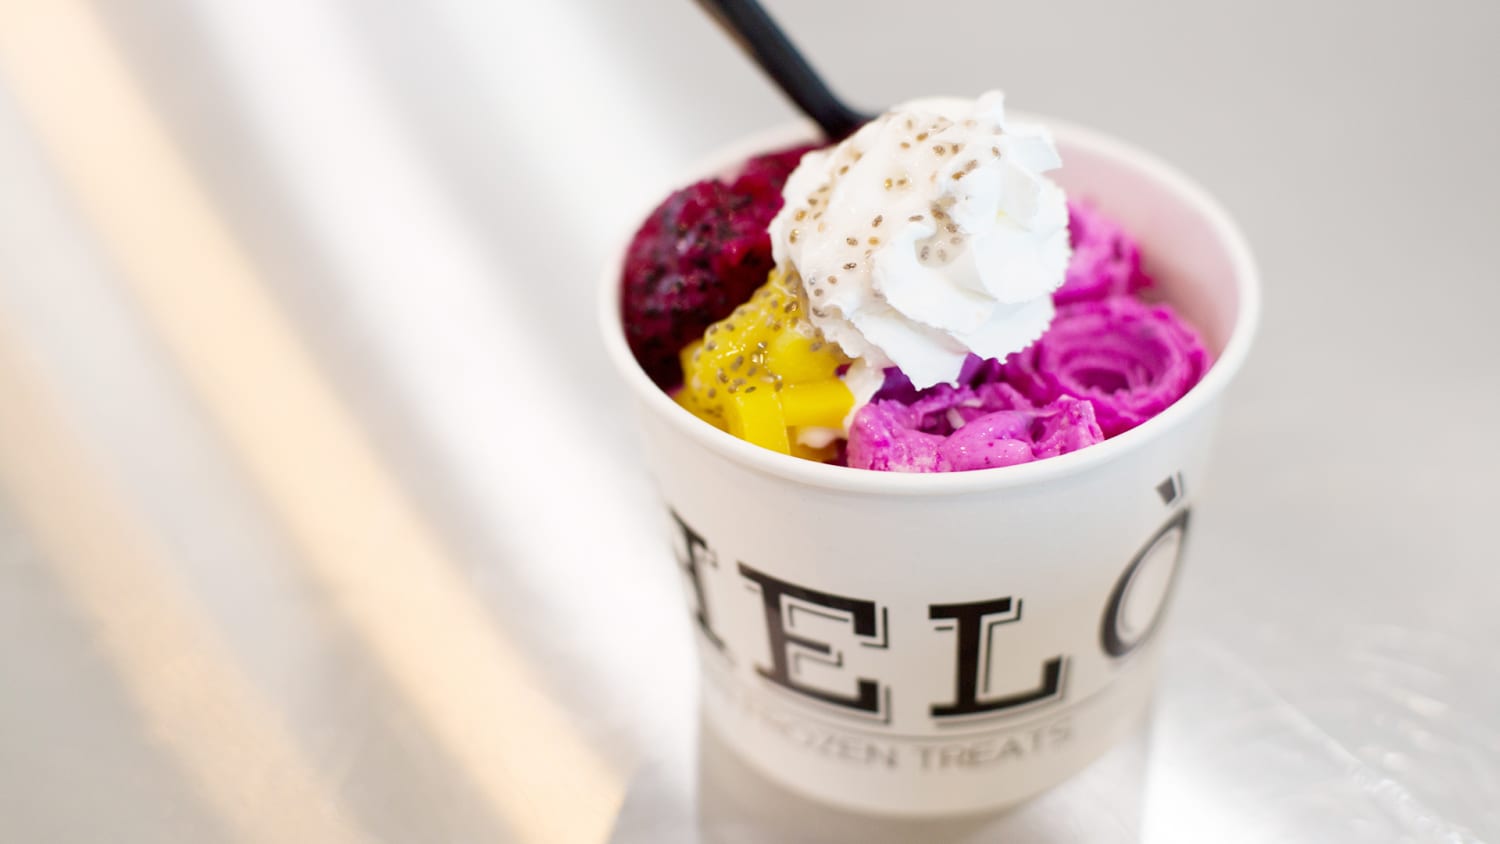 On a roll: Thai rolled ice cream brings fresh new flavors